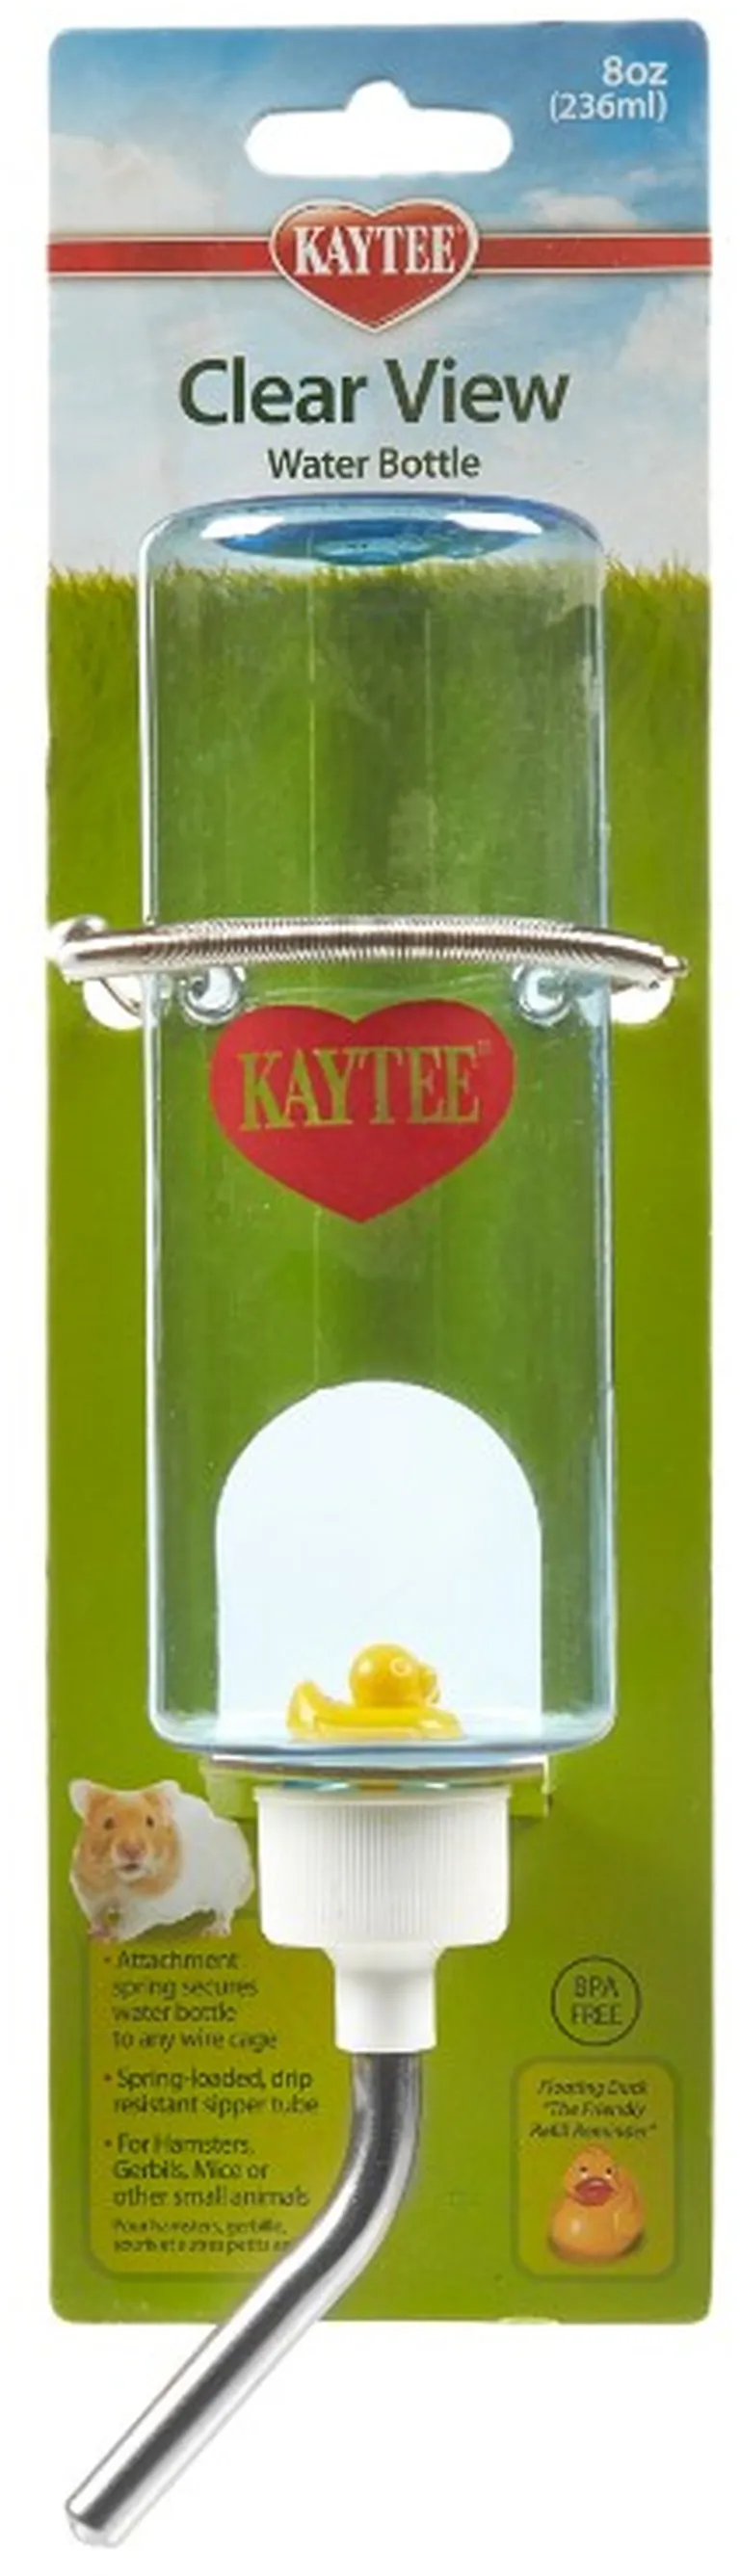 Kaytee Clear View Water Bottle for Small Pets Photo 1